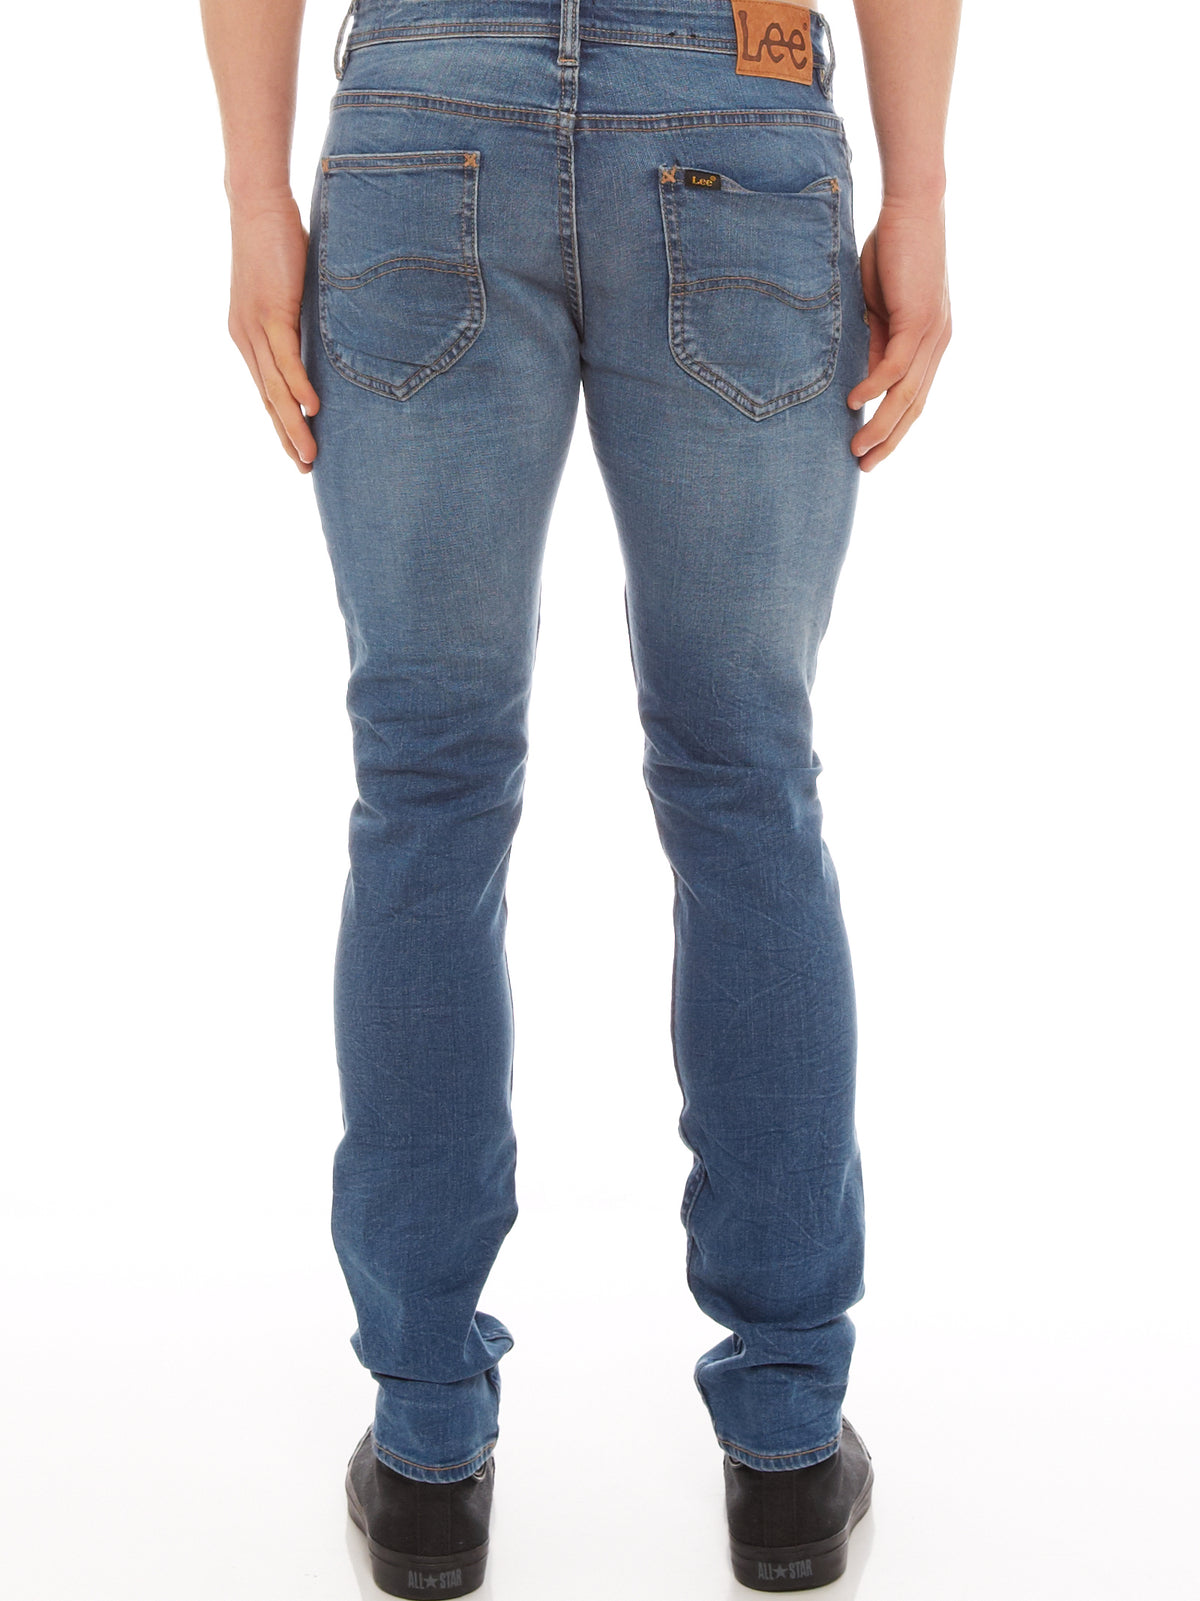 L1 Stovepipe Jeans in Blue